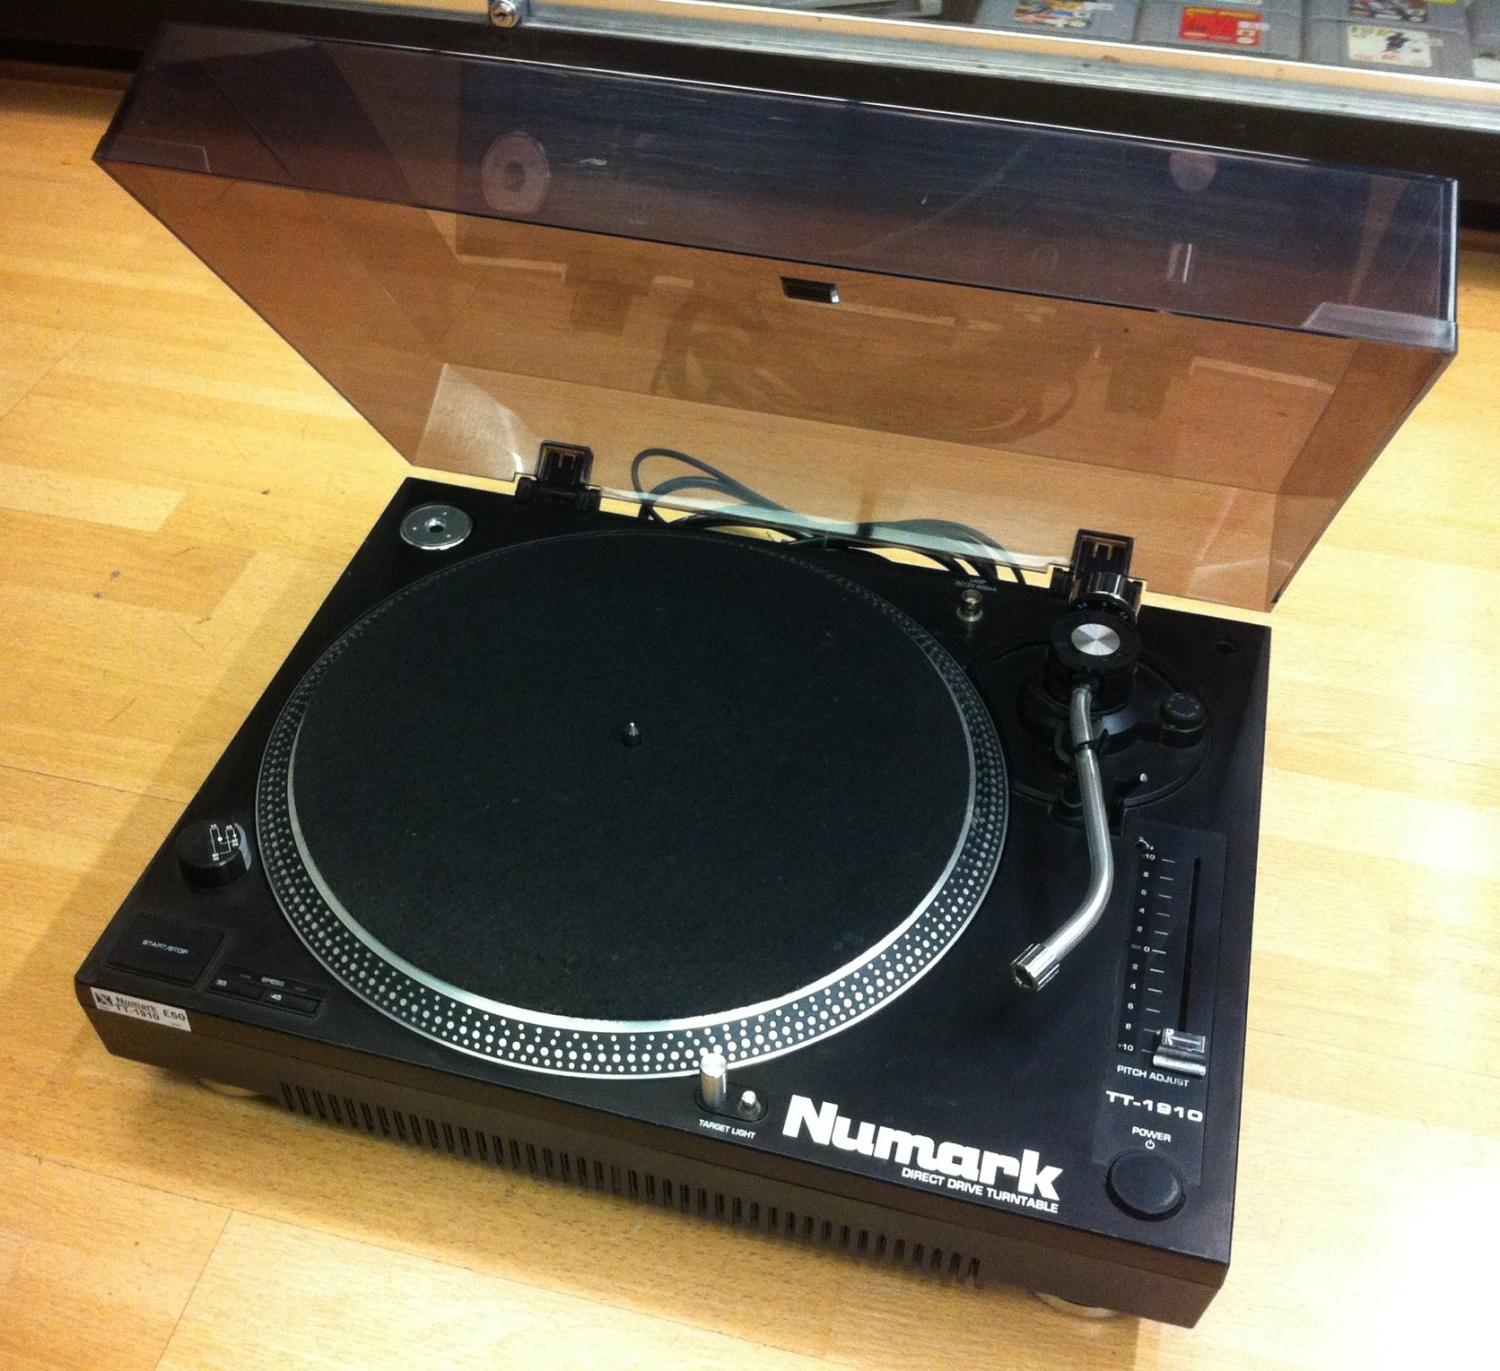 Numark TT-1910 for sale at X Electrical